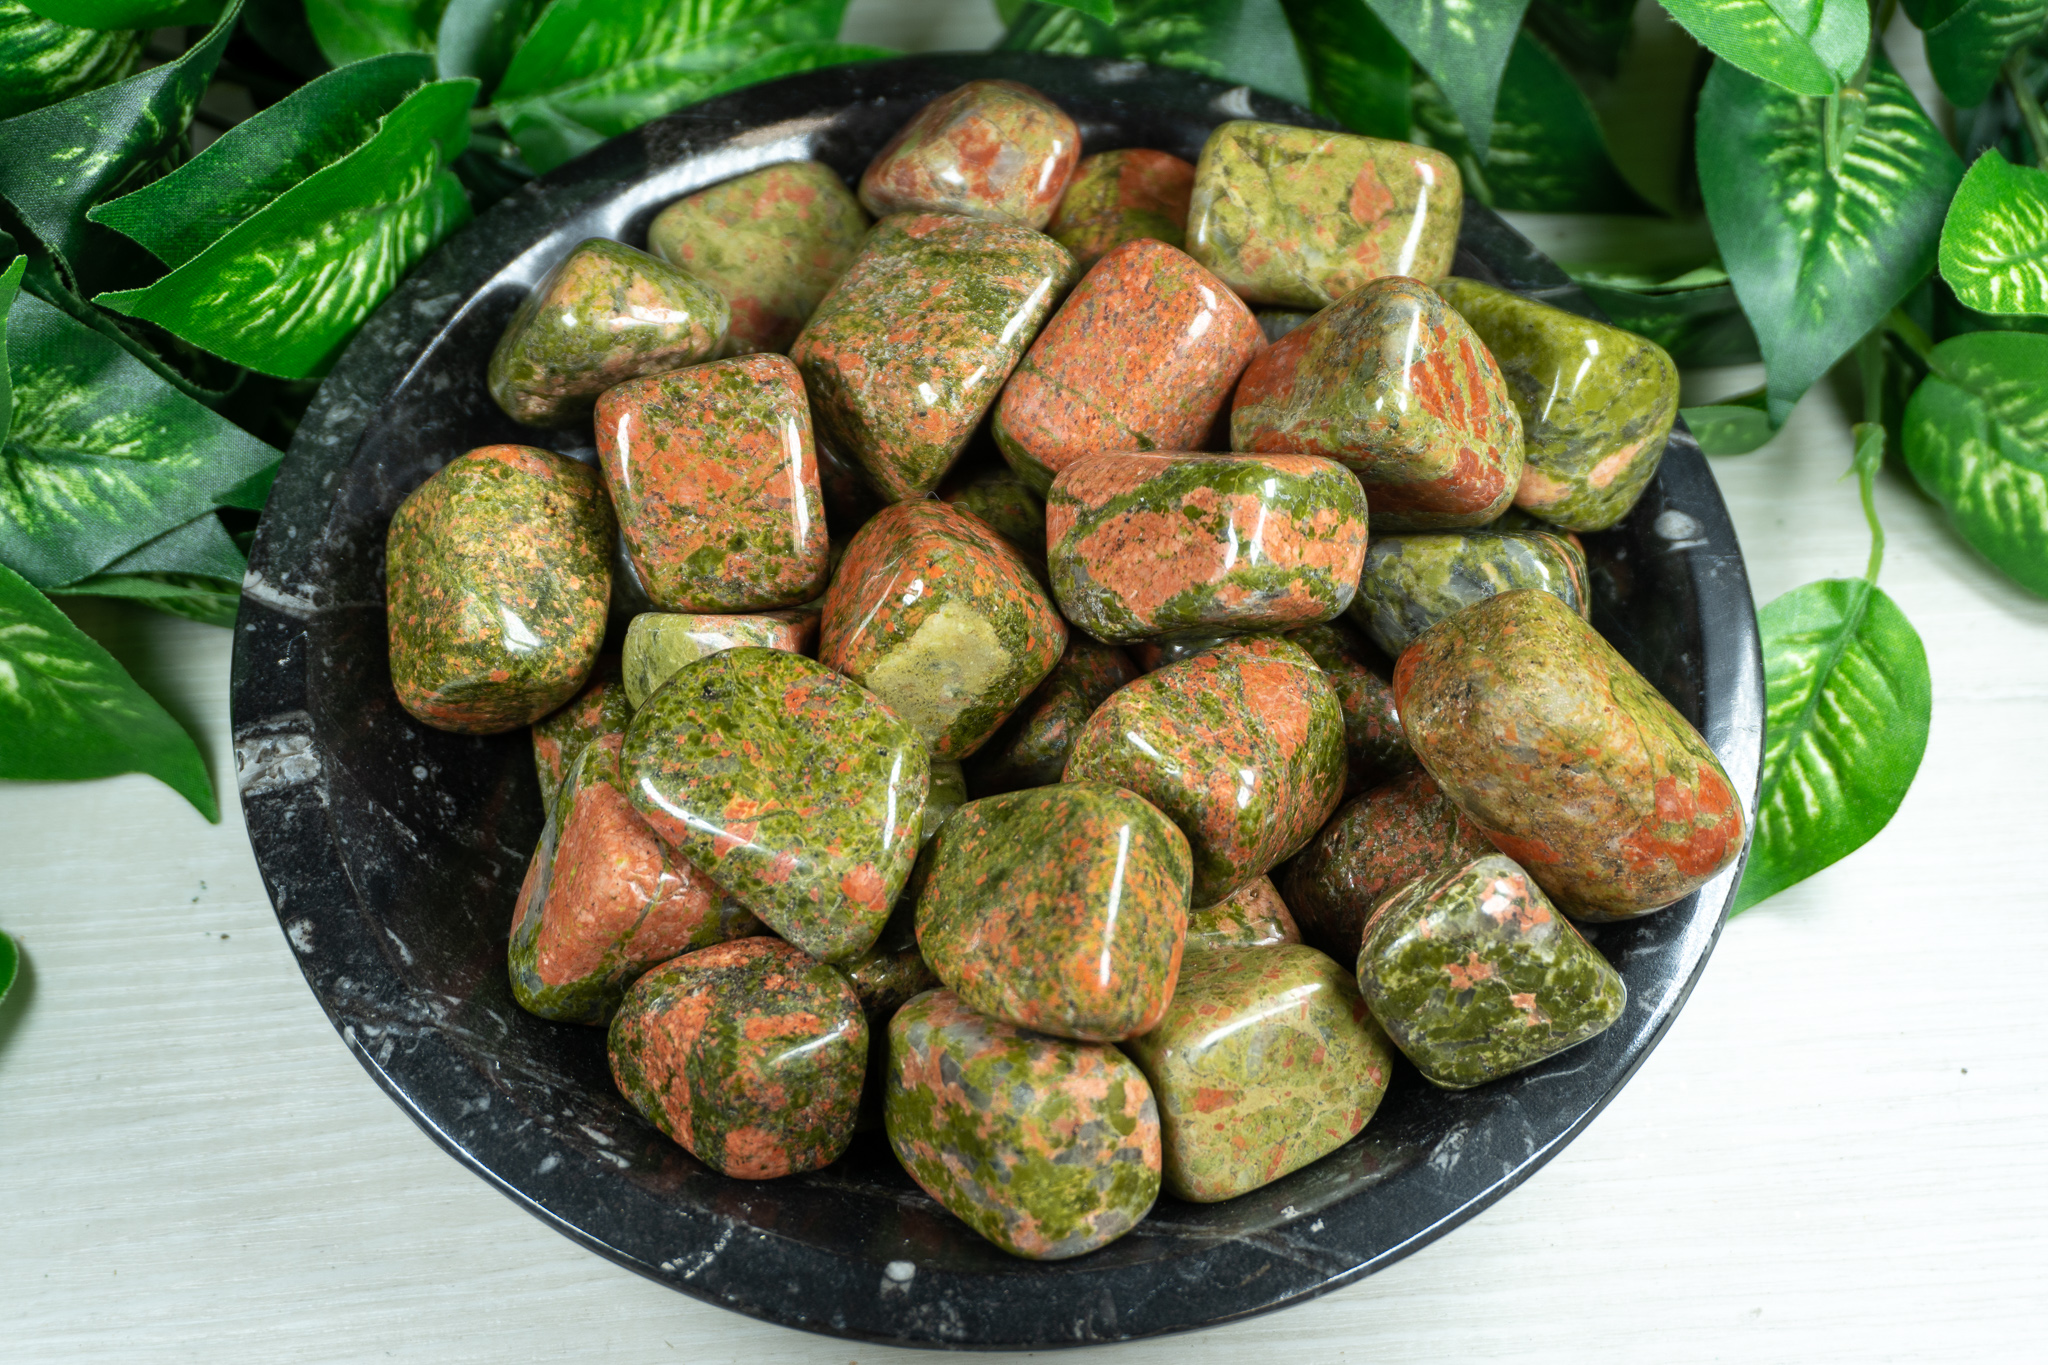 Unakite Meanings, Properties and Uses